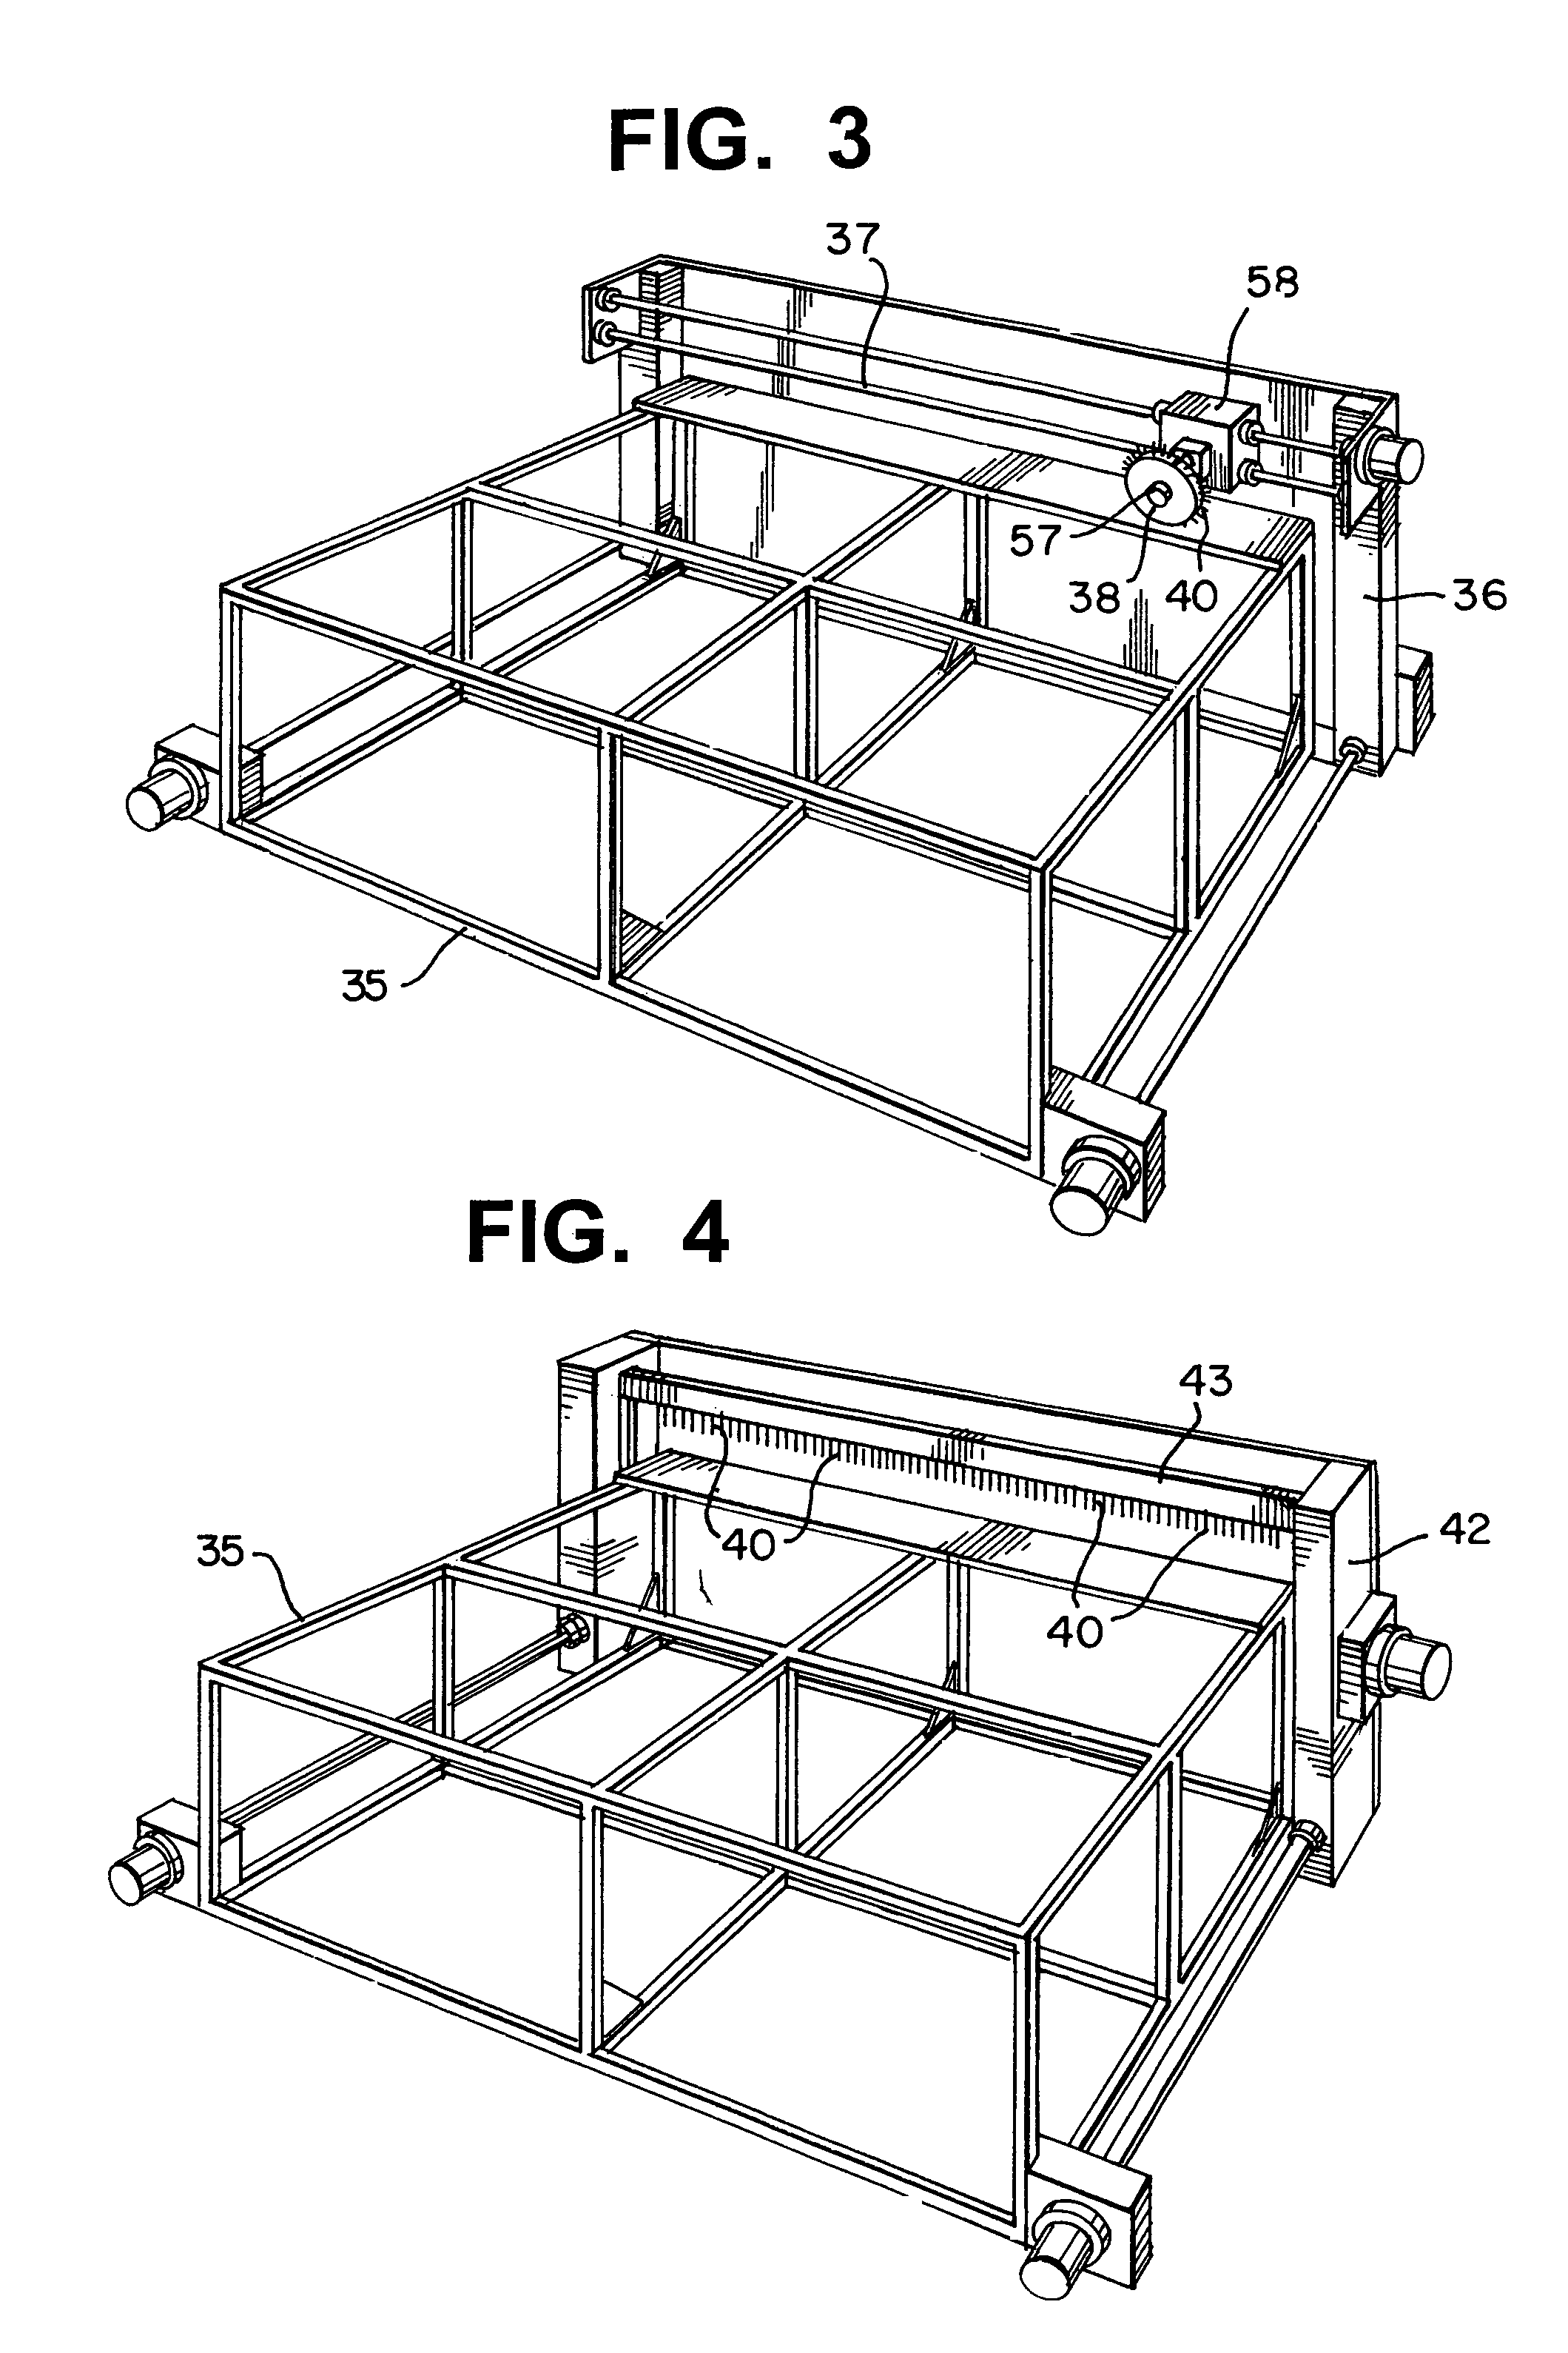 Method for manufacturing enhanced foam thermoplastic products